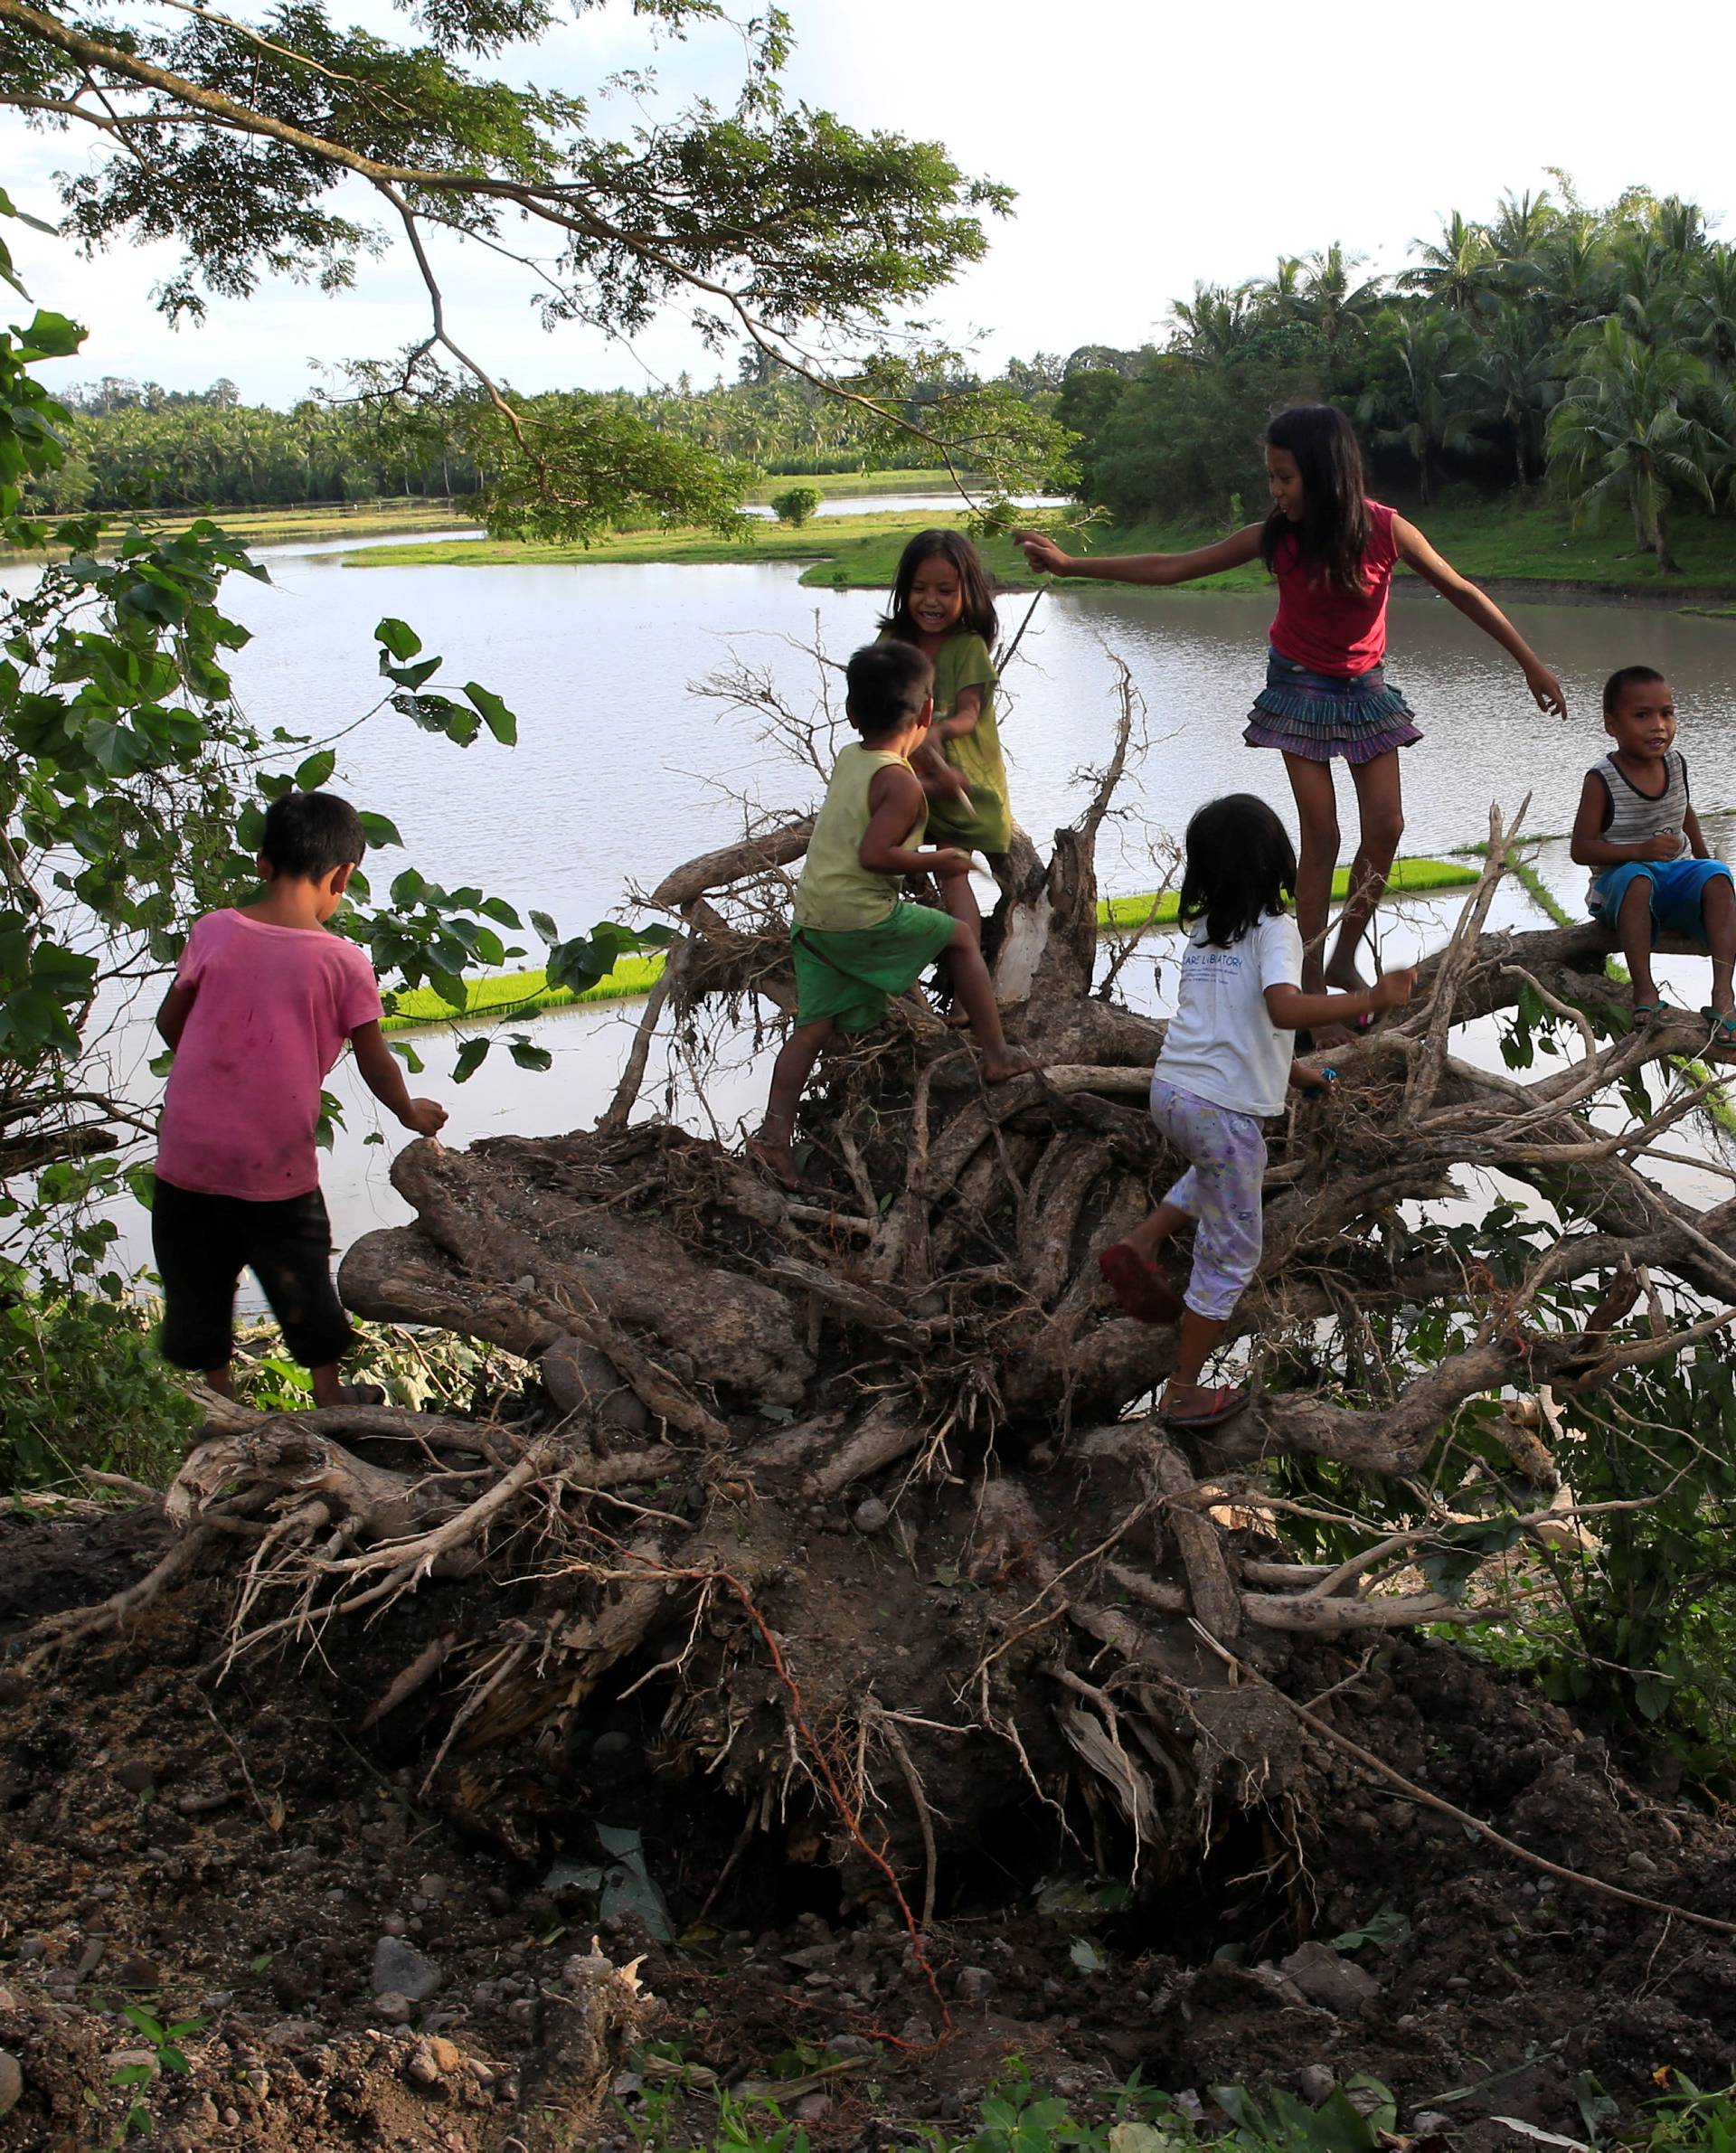 Childrens play at a tree uprooted by strong winds brought by Typhoon Nock-ten which cut through Camarines Sur, Bicol region